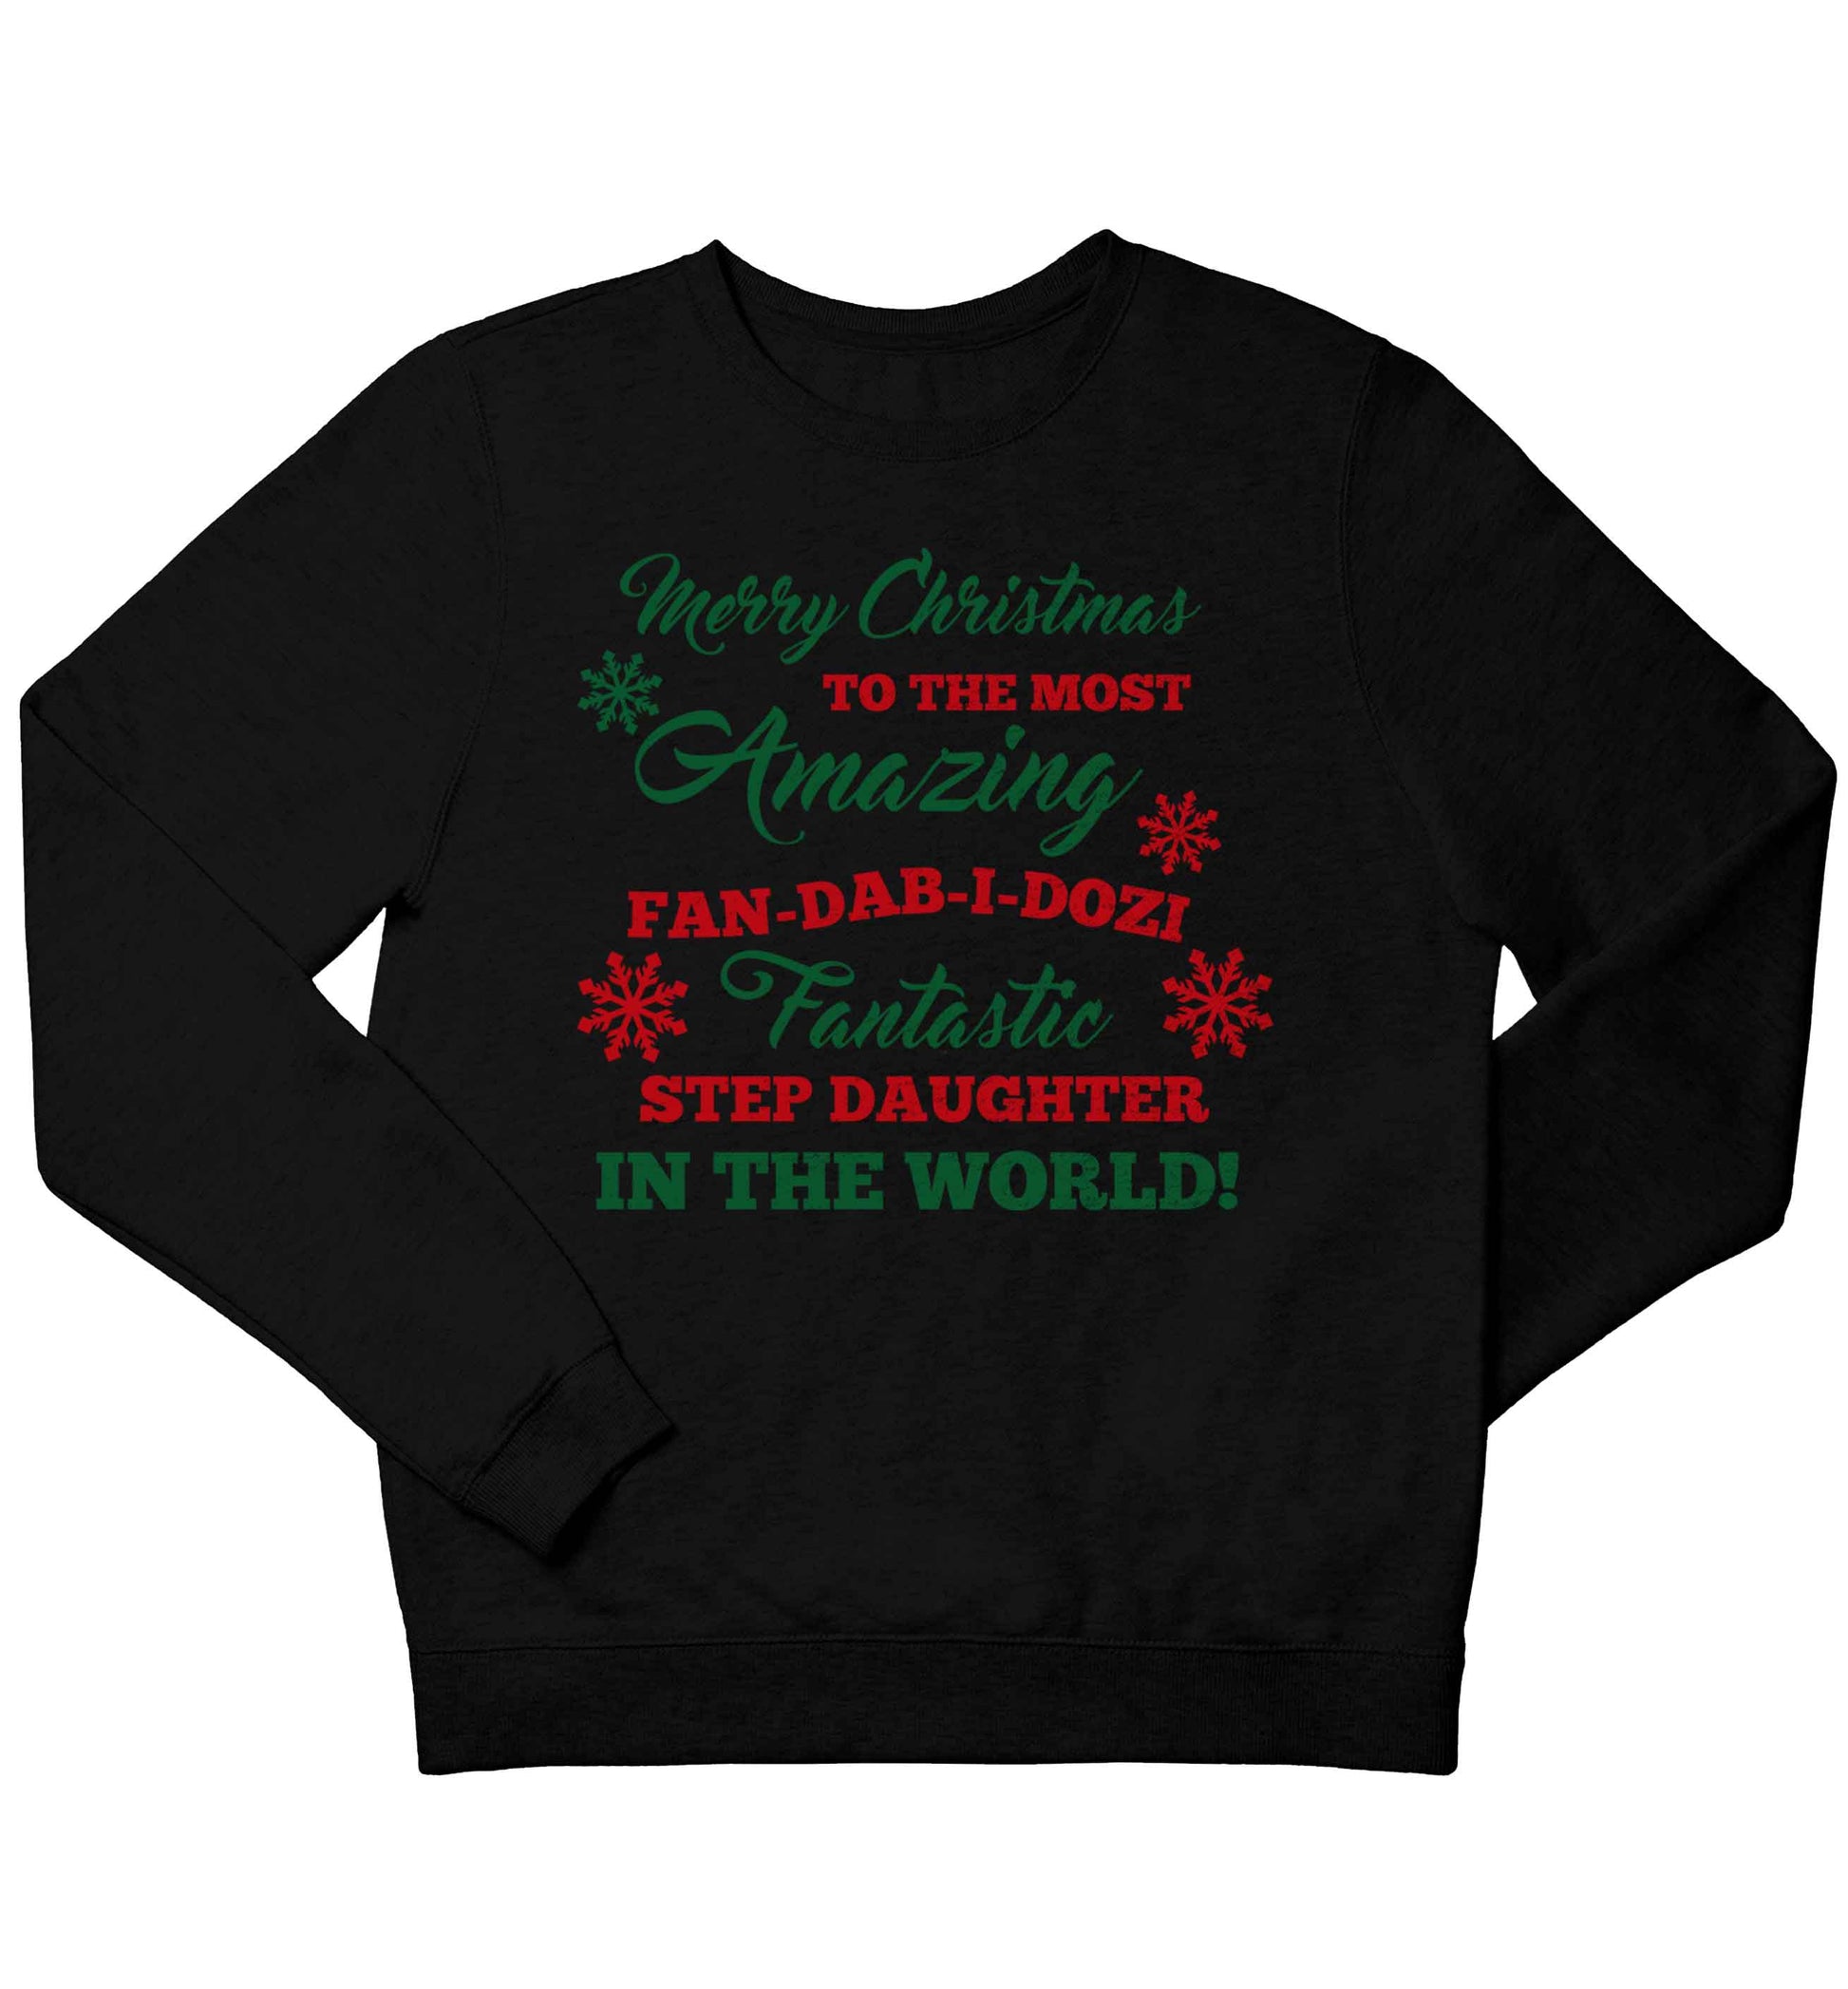 Merry Christmas to the most amazing fan-dab-i-dozi fantasic Step Daughter in the world children's black sweater 12-13 Years